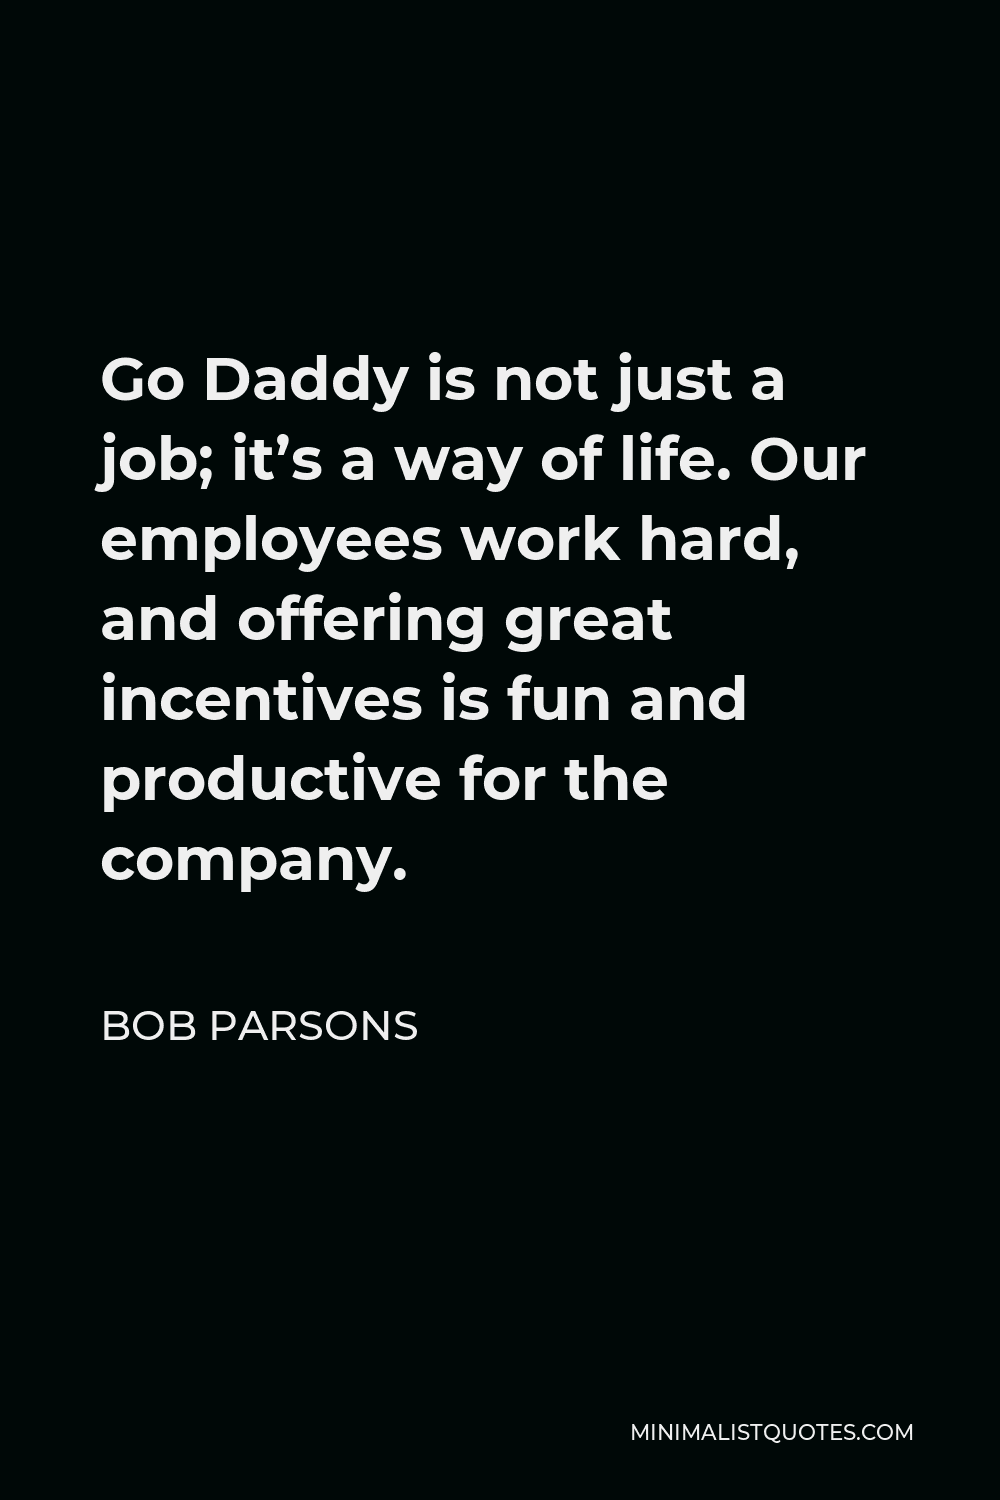 Bob Parsons Quote - Go Daddy is not just a job; it’s a way of life. Our employees work hard, and offering great incentives is fun and productive for the company.